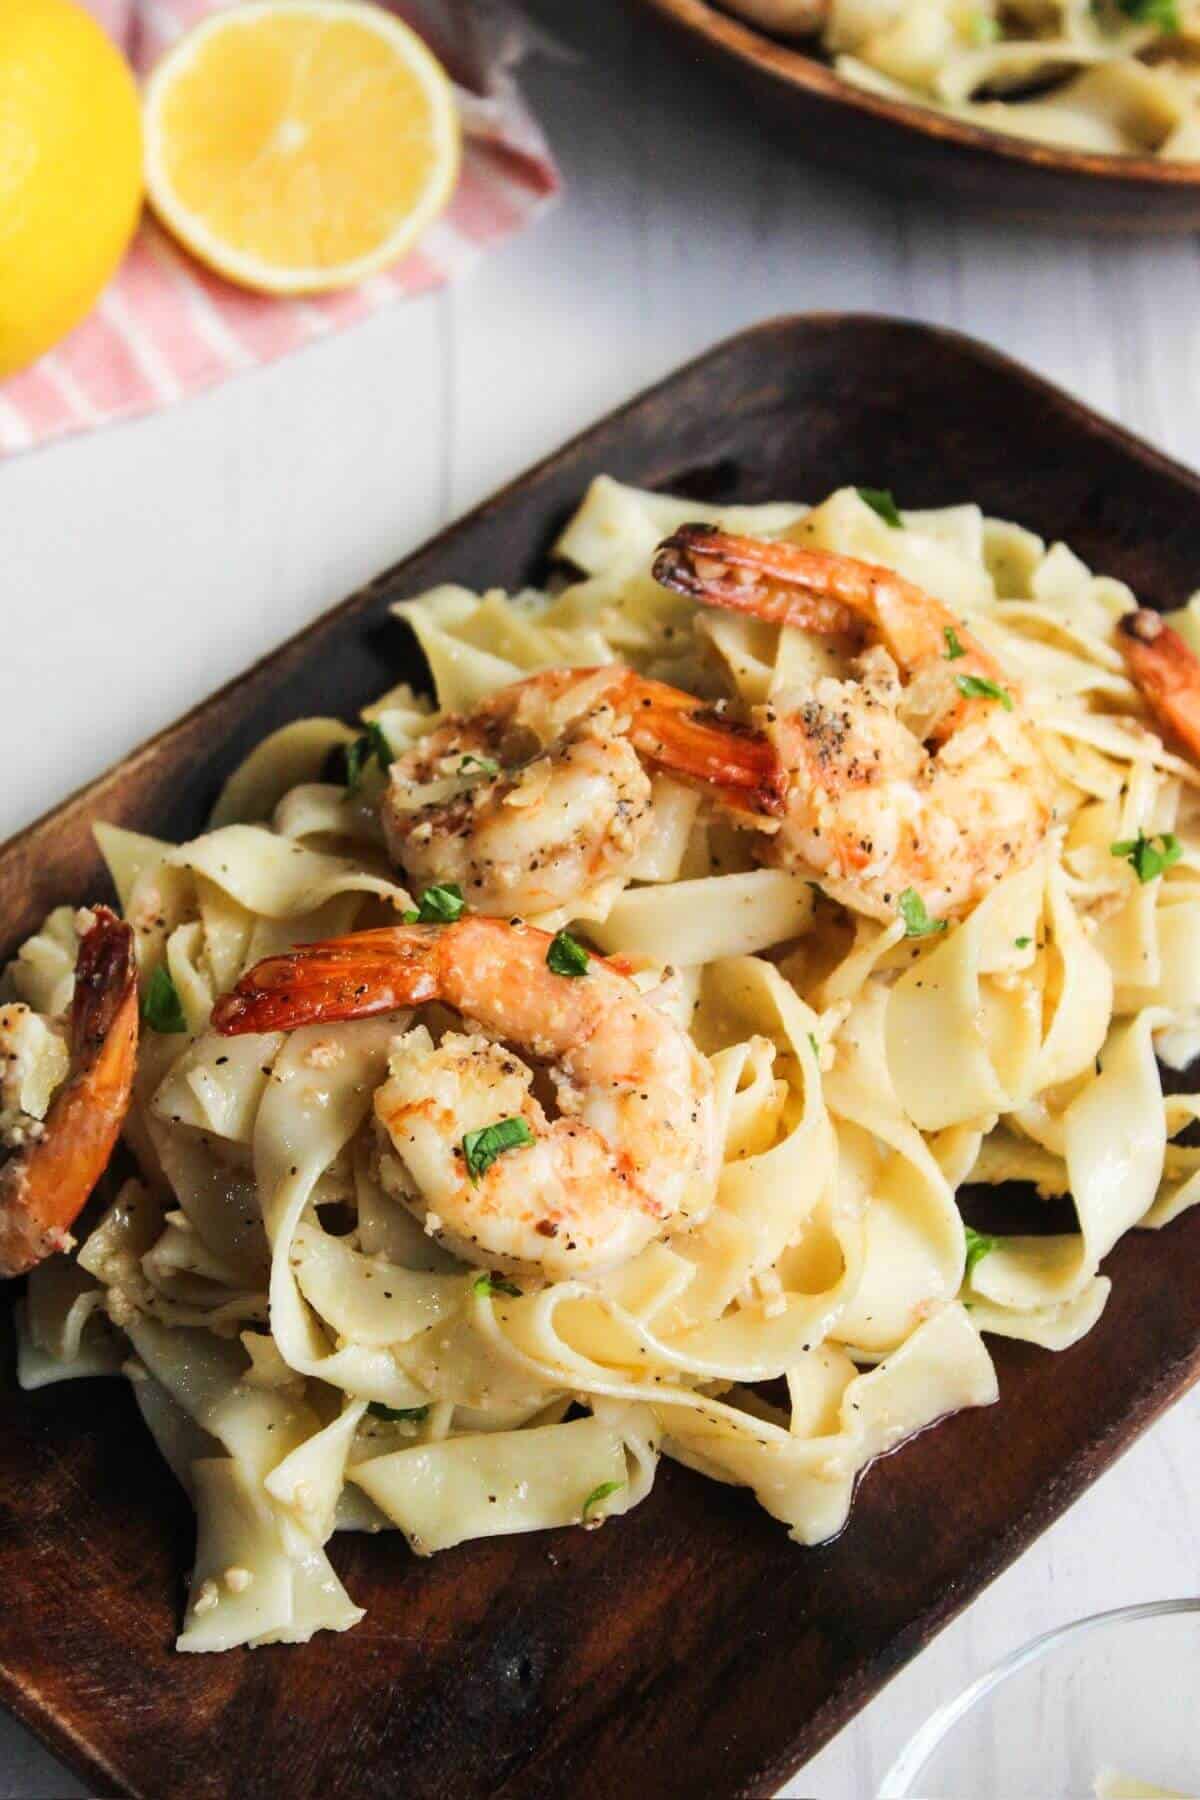 A plate of pasta with shrimp and lemon slices.